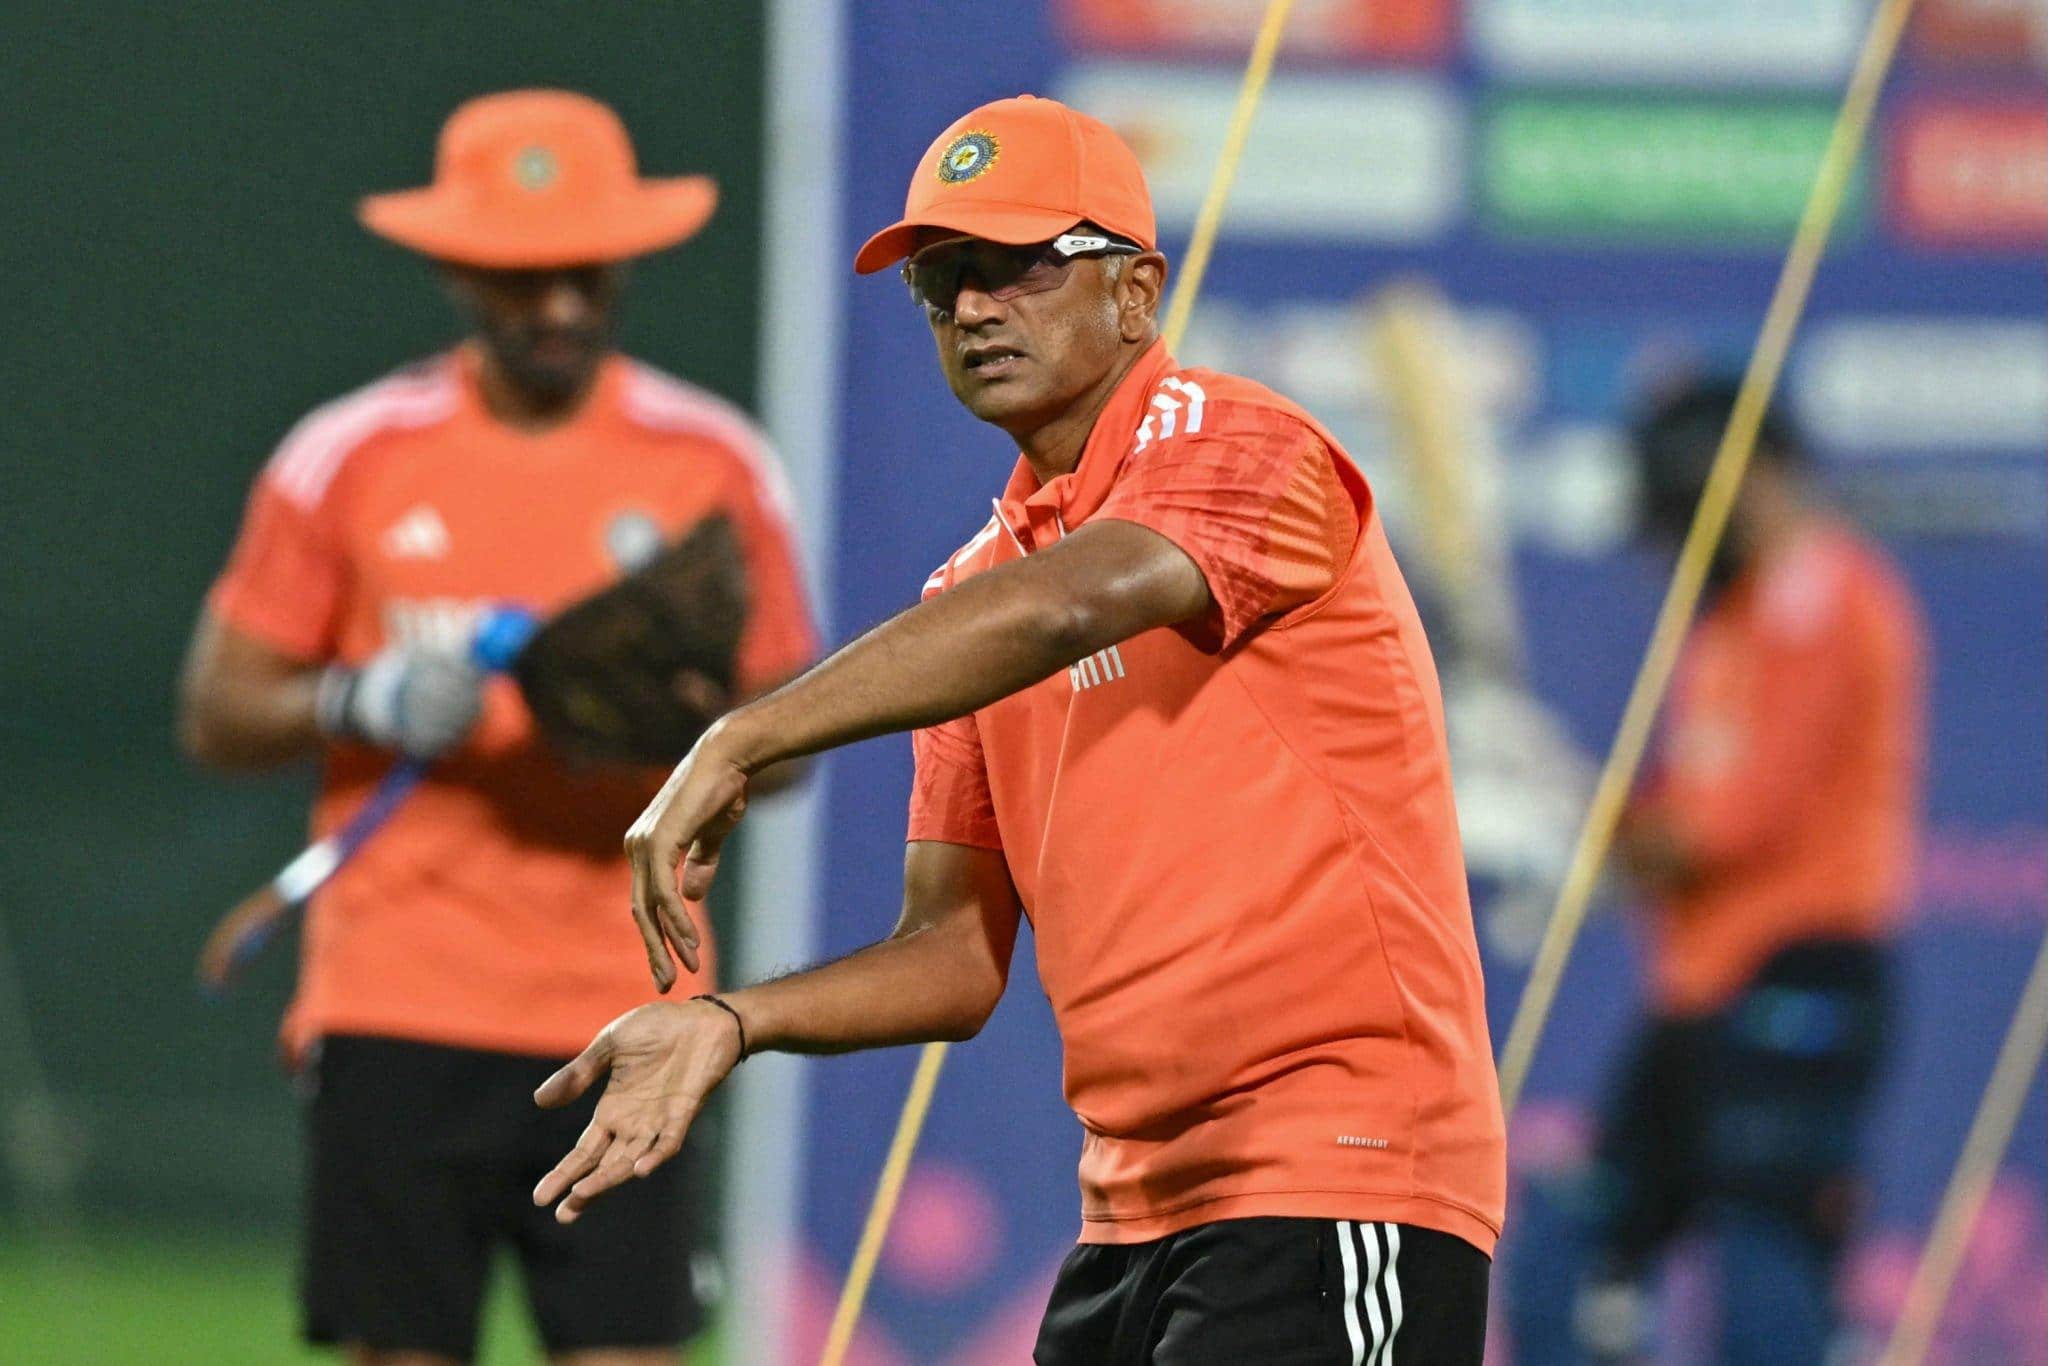 'Have Set Some High Standards' - Rahul Dravid Ahead Of India's Final League Game vs NED 